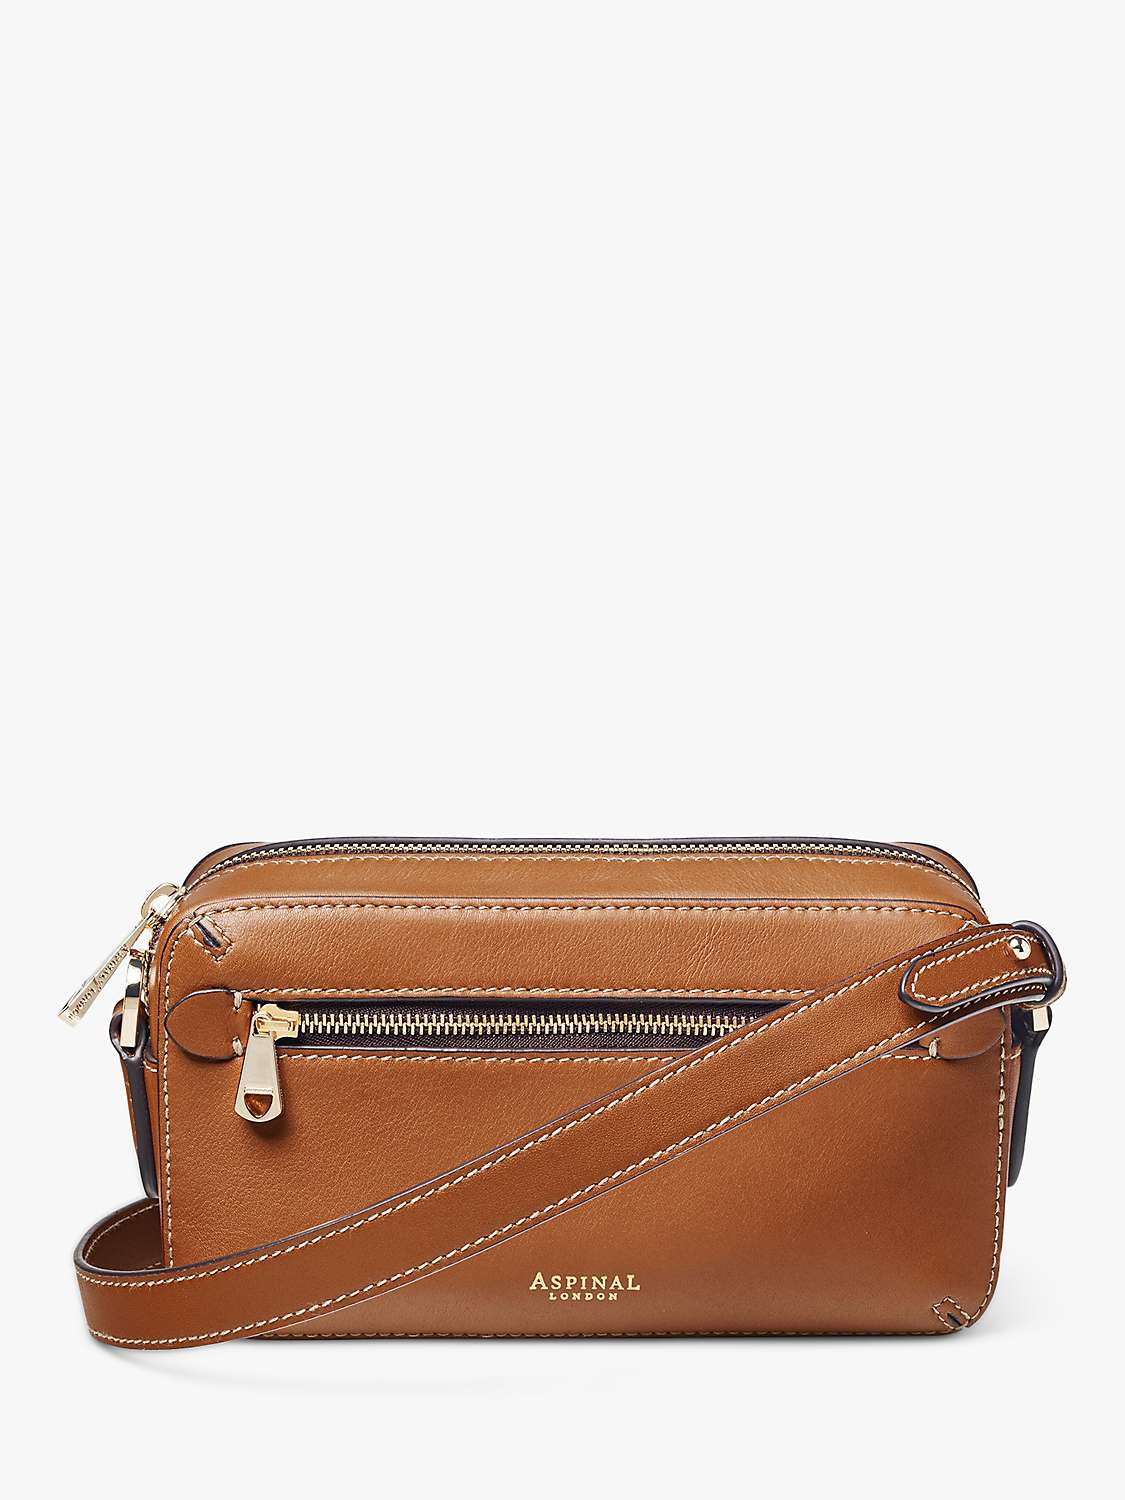 Buy Aspinal of London Smooth Leather Camera Bag, Tan Online at johnlewis.com